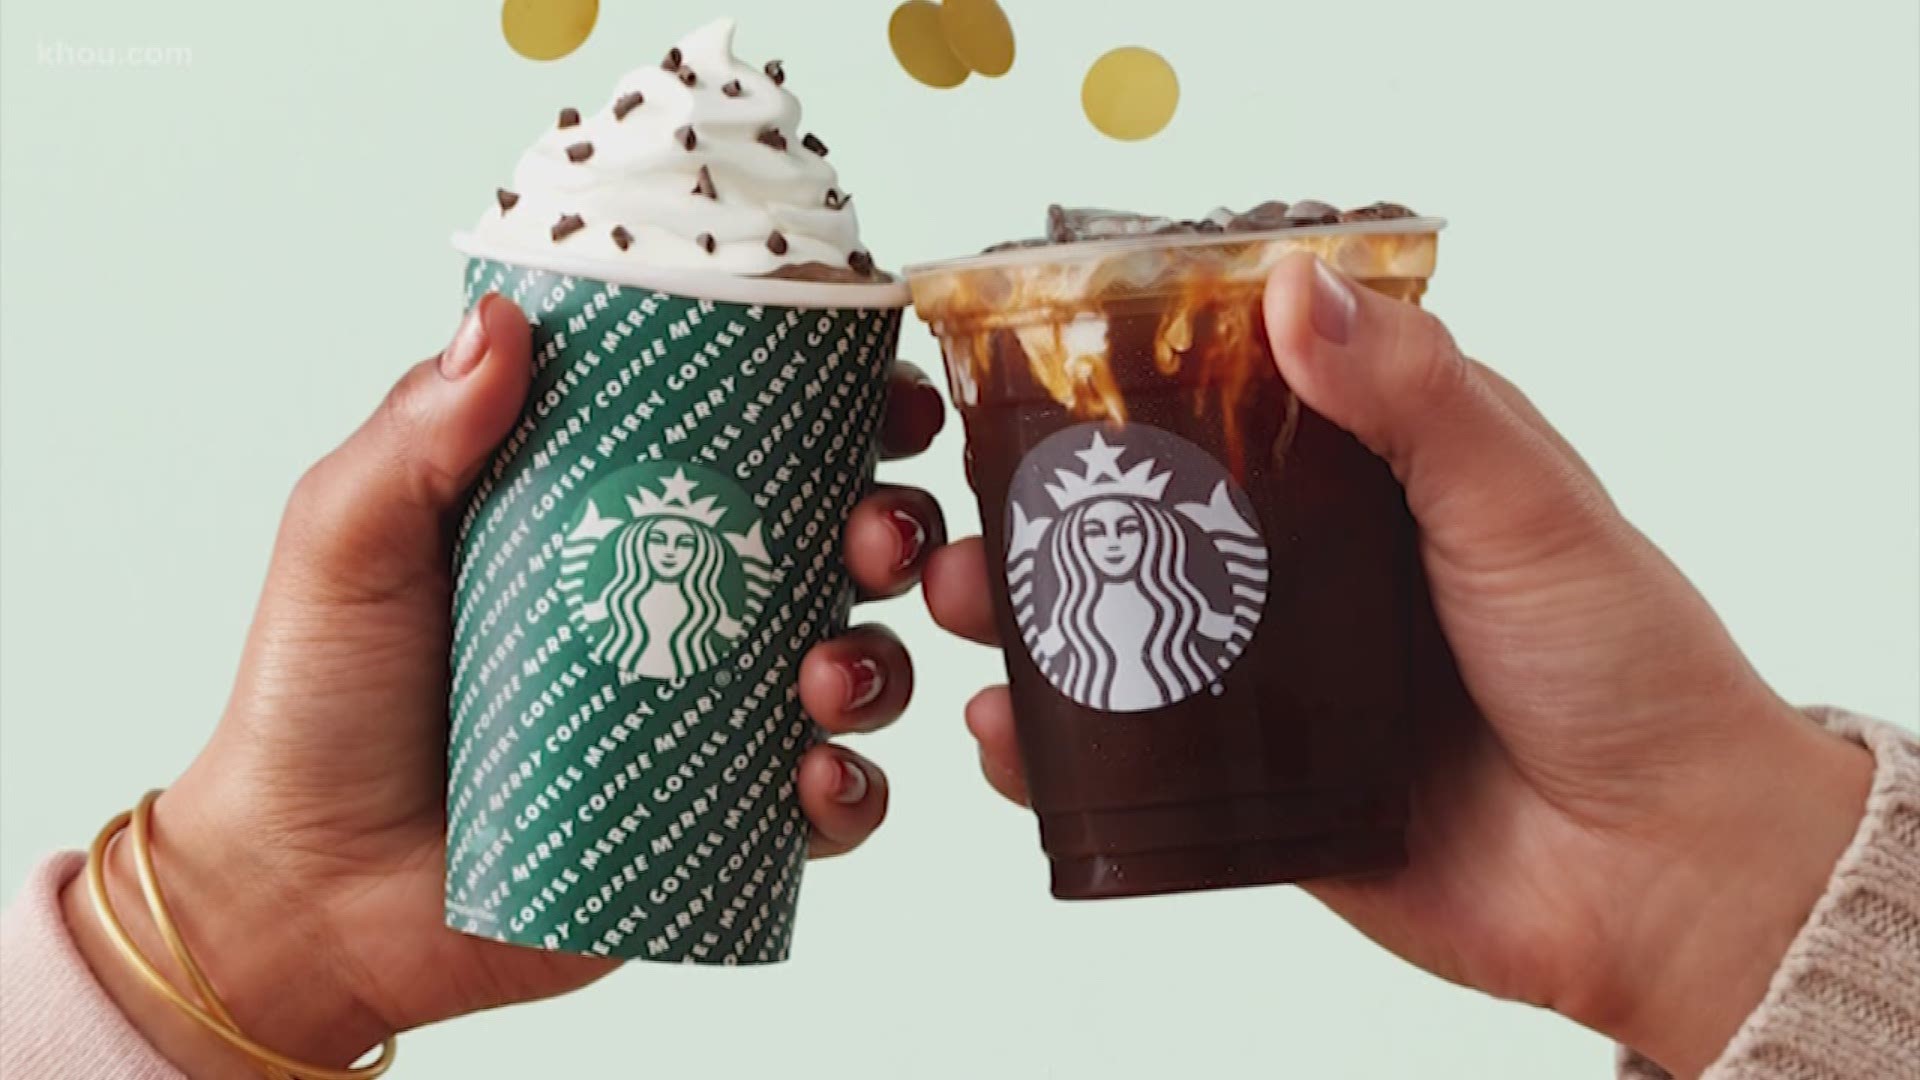 Starbucks is closing out 2019 and ringing in the New Year with free coffee at Pop-up Parties all over the country.